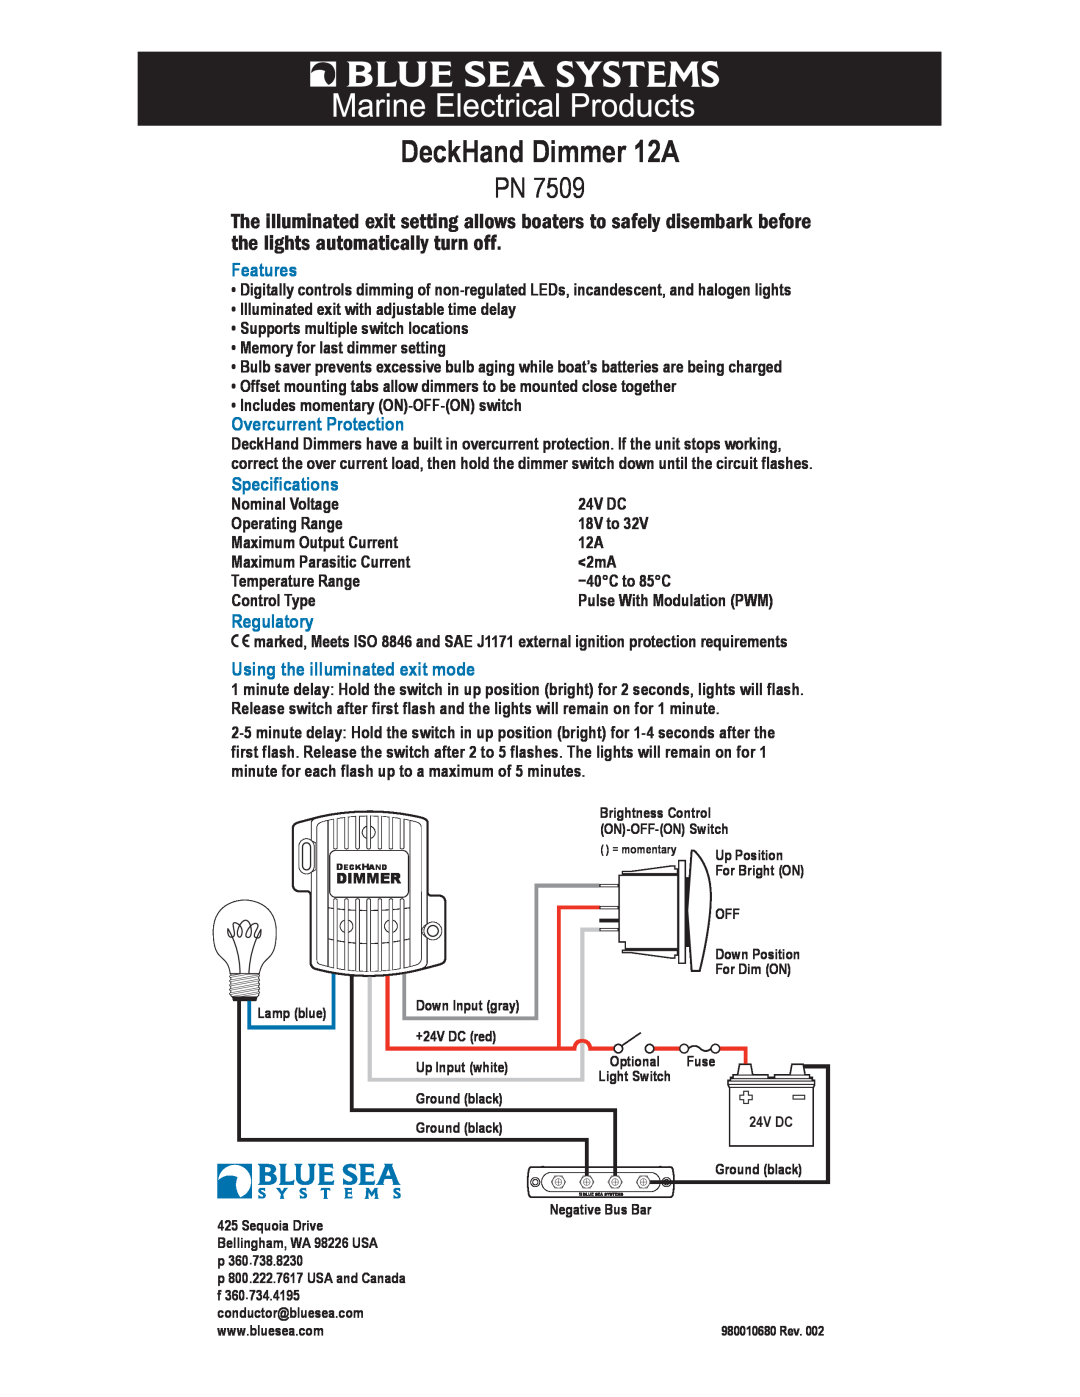 Blue Sea Systems Pn 7509 specifications DeckHand Dimmer 12A, Features, Specifications, Regulatory 